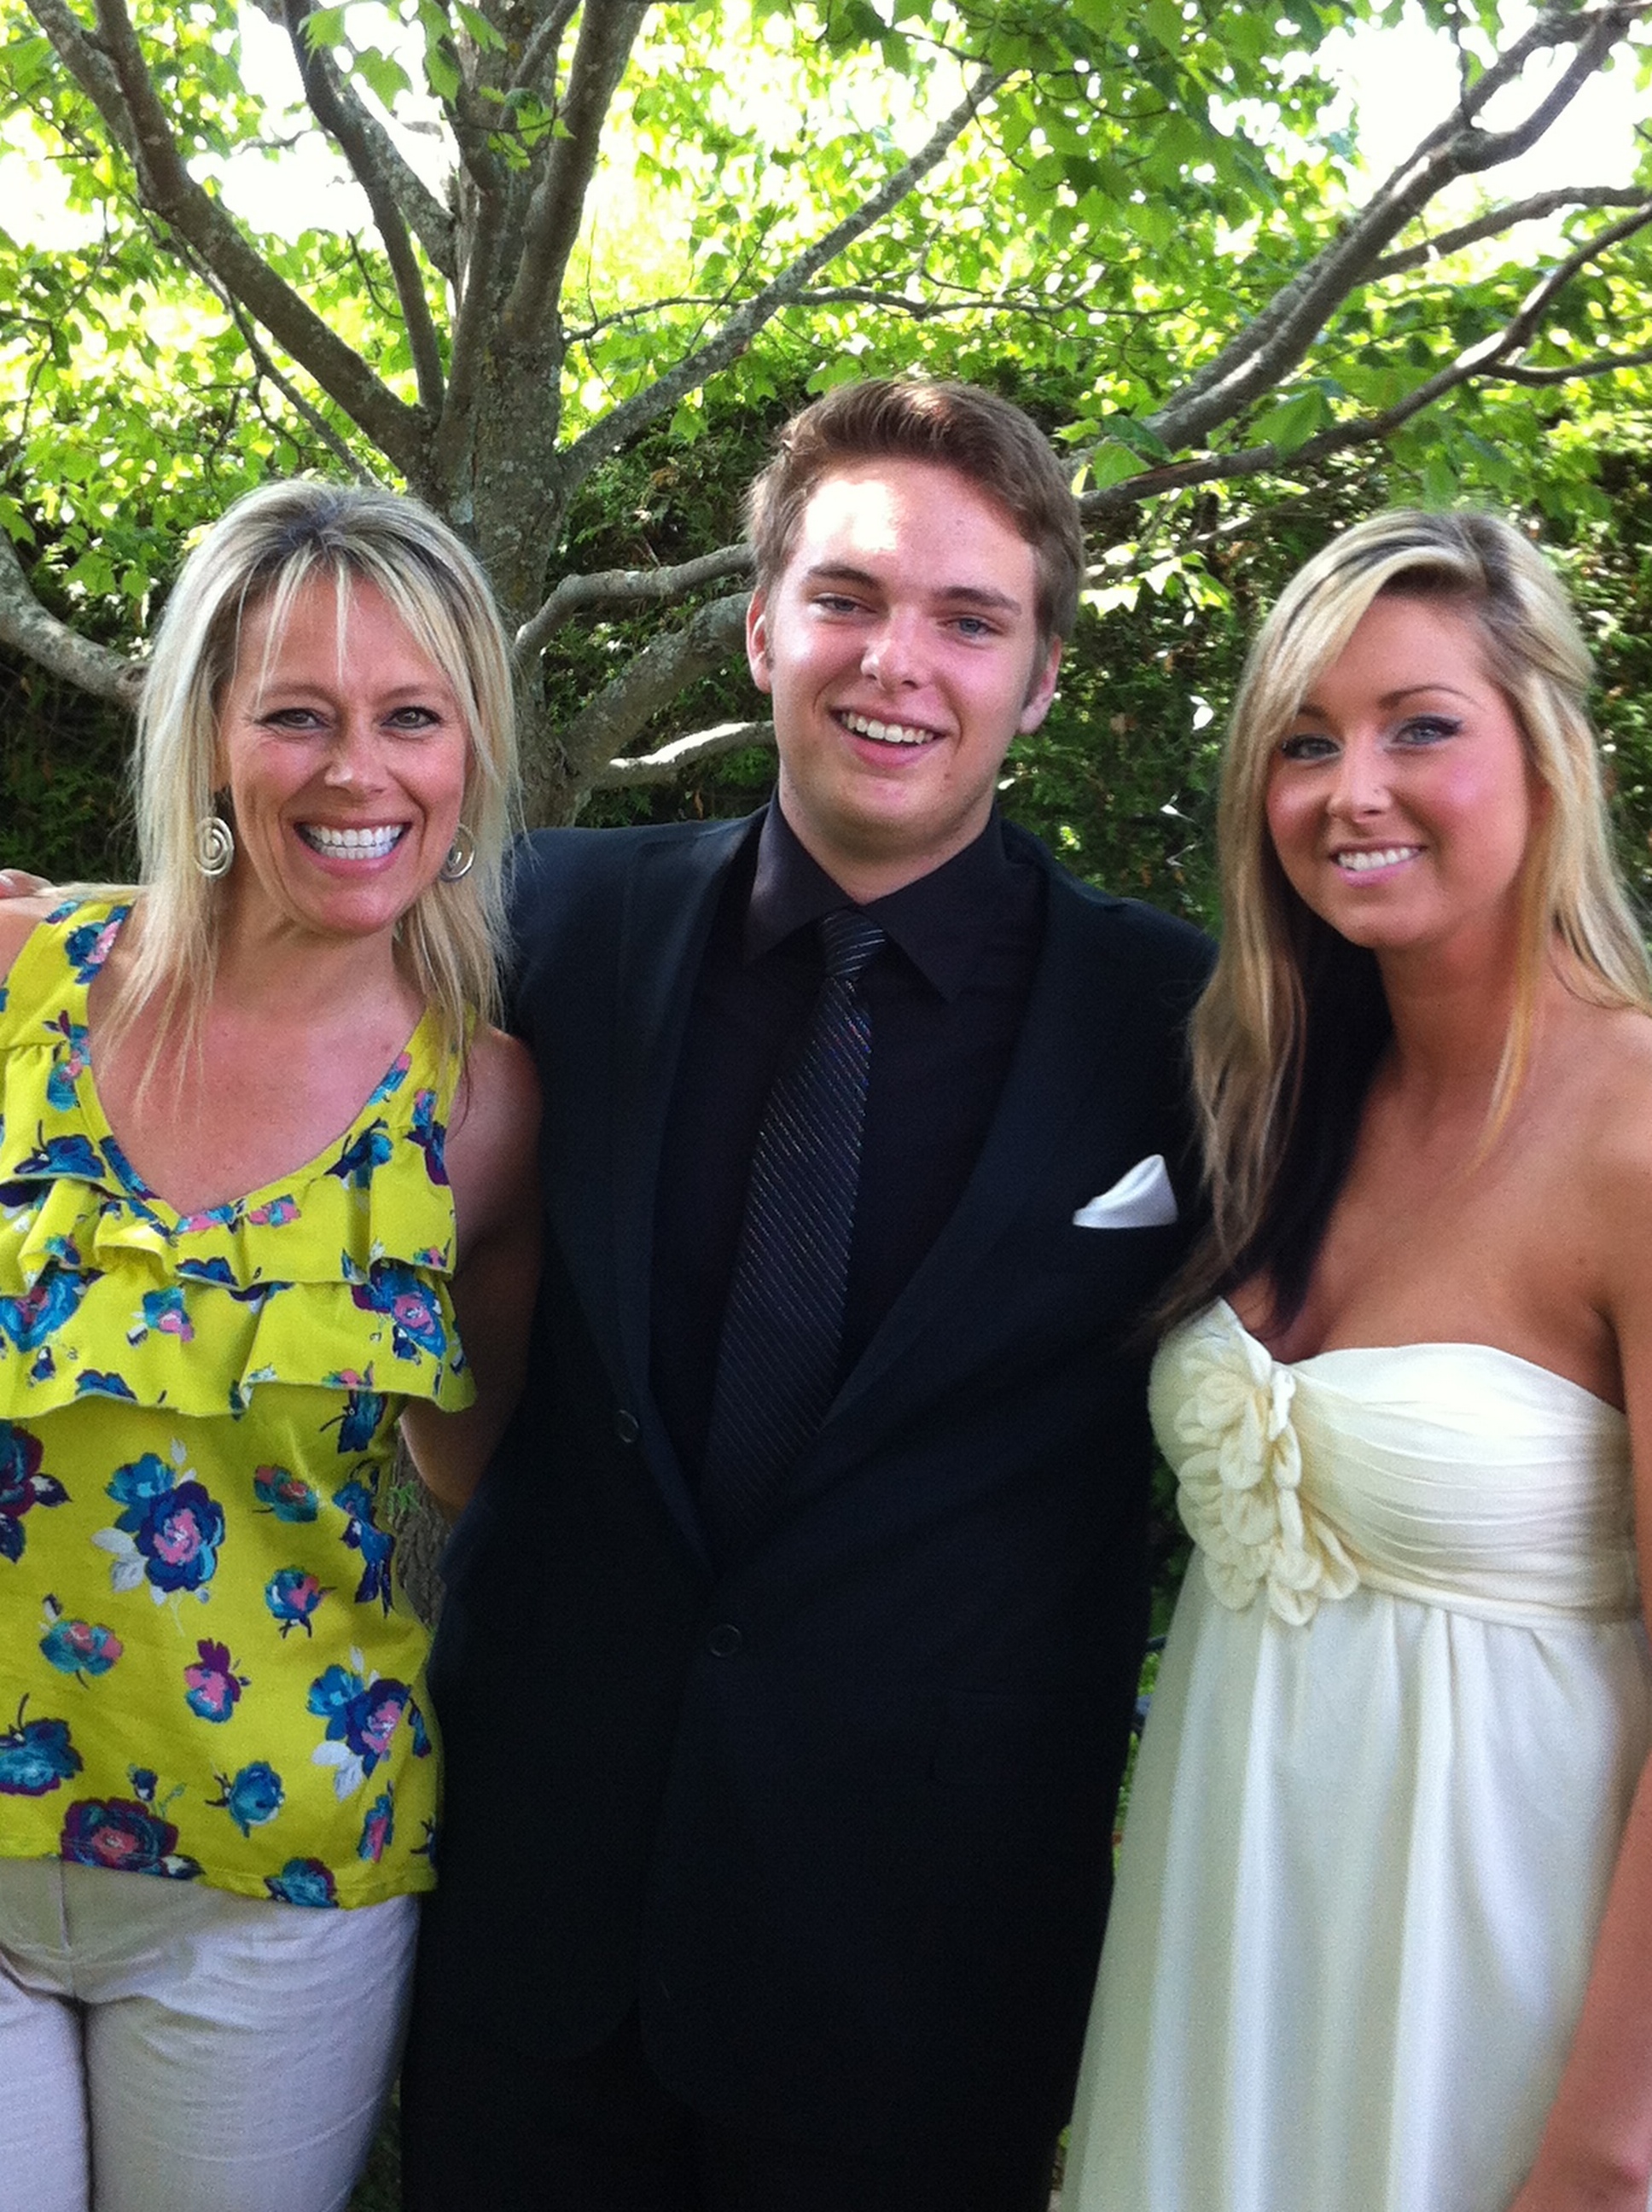 This is Angie, Austin and Lindsay. The photo was taken at a pre-prom garden party on the occasion of Austin's high school graduation in June 2012.